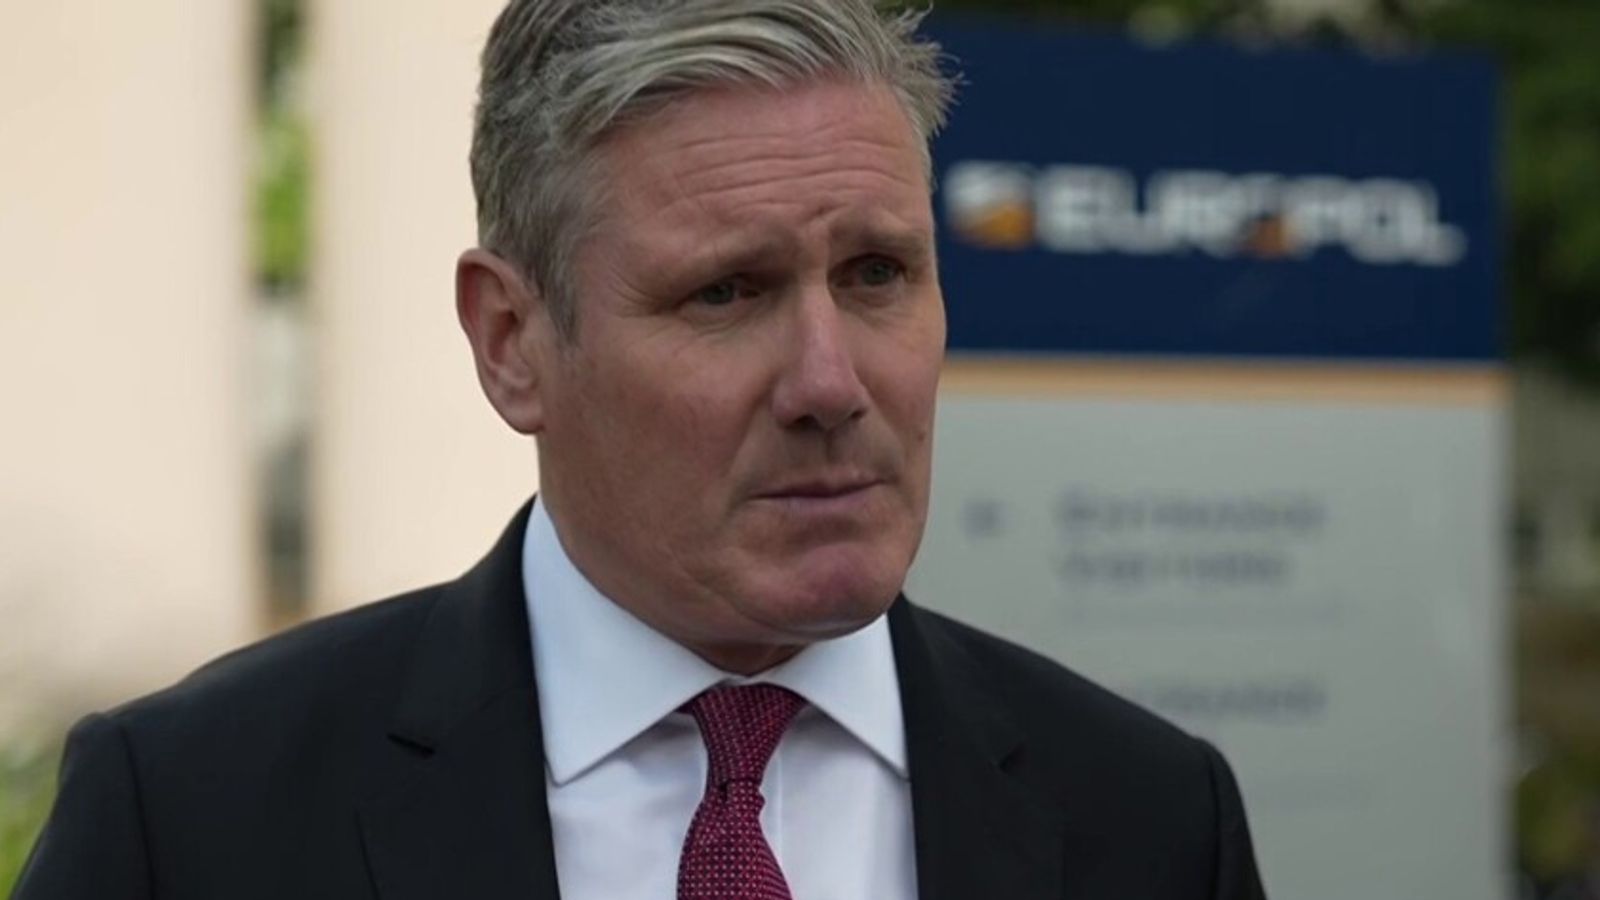 Sir Keir Starmer insists UK will not be a 'rule-taker' after backlash over stance on EU